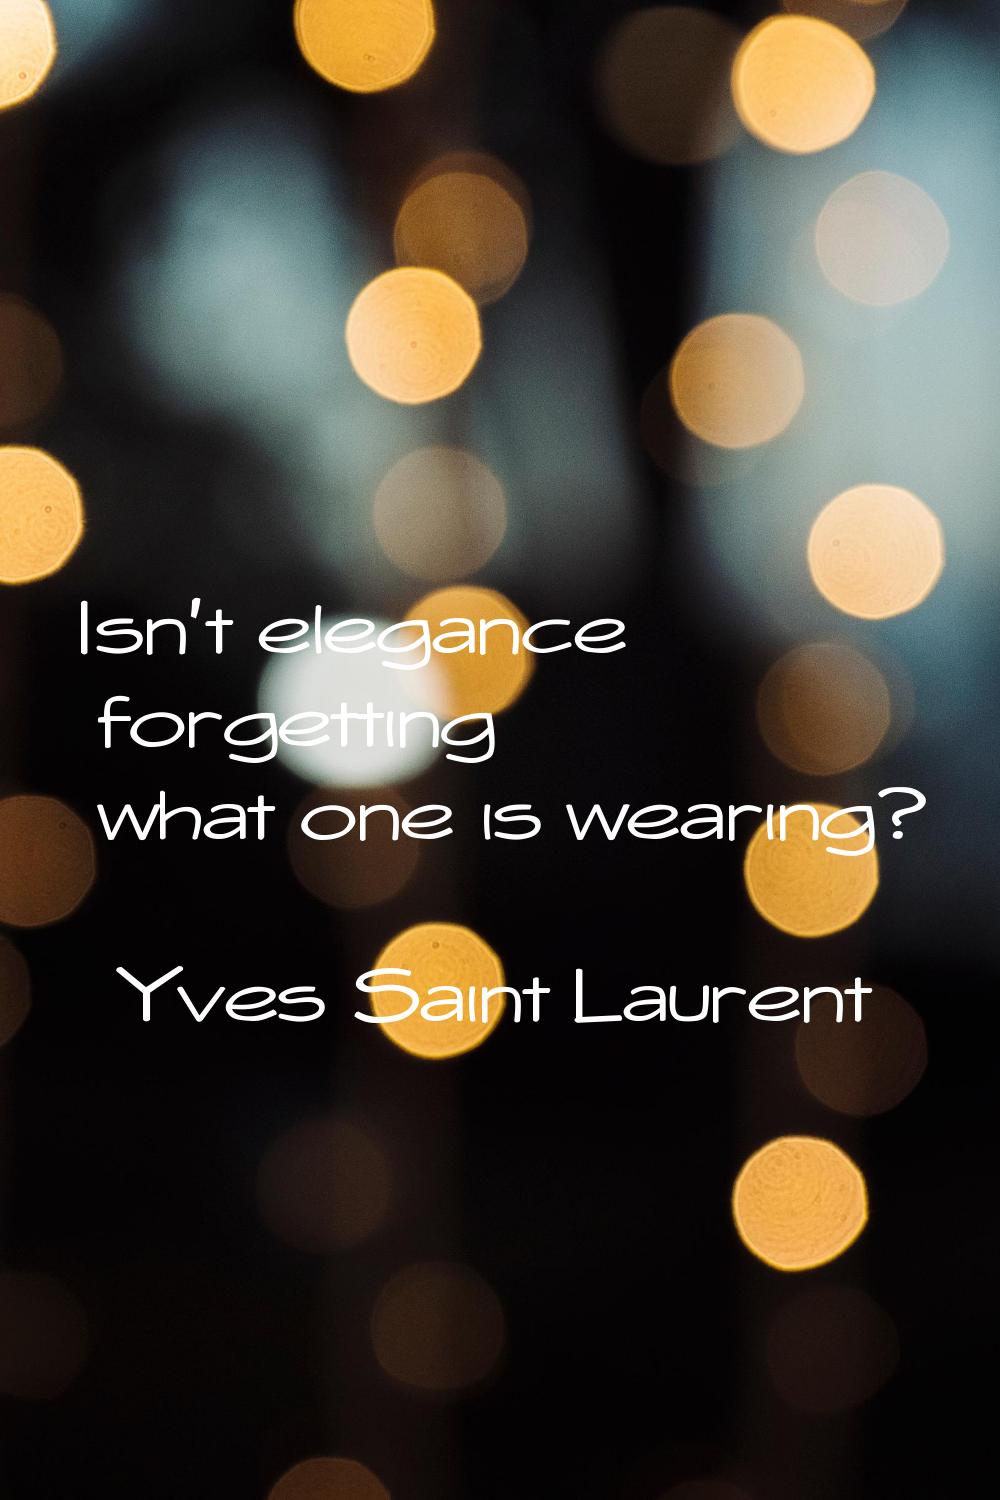 Isn't elegance forgetting what one is wearing?